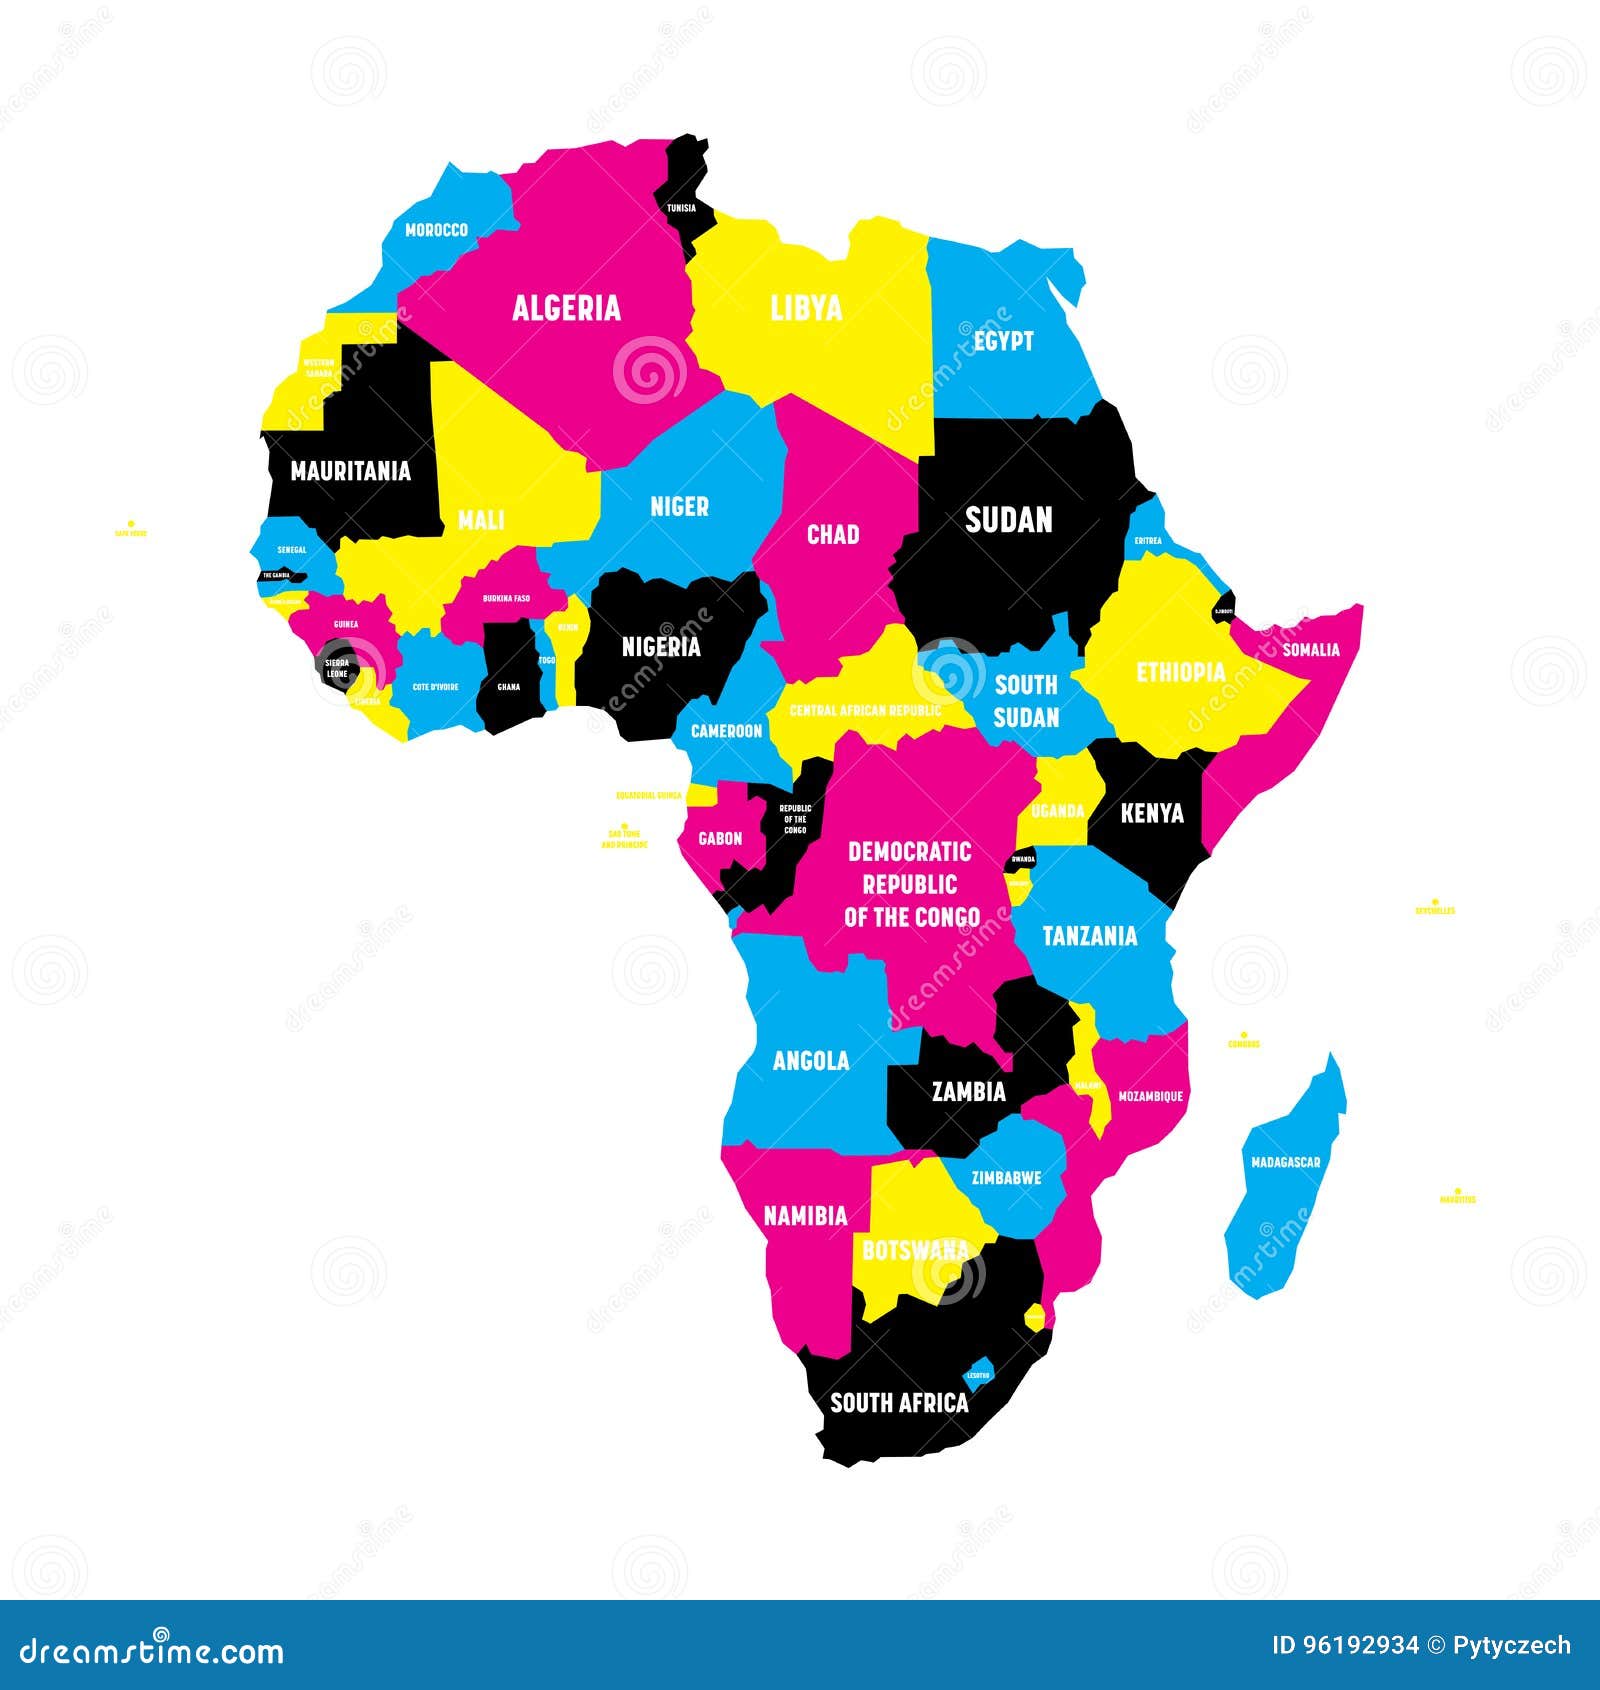 Political Map Of Africa Continent In Cmyk Colors With National Borders And Country Name Labels On White Background Stock Vector Illustration Of Cartography Land 96192934